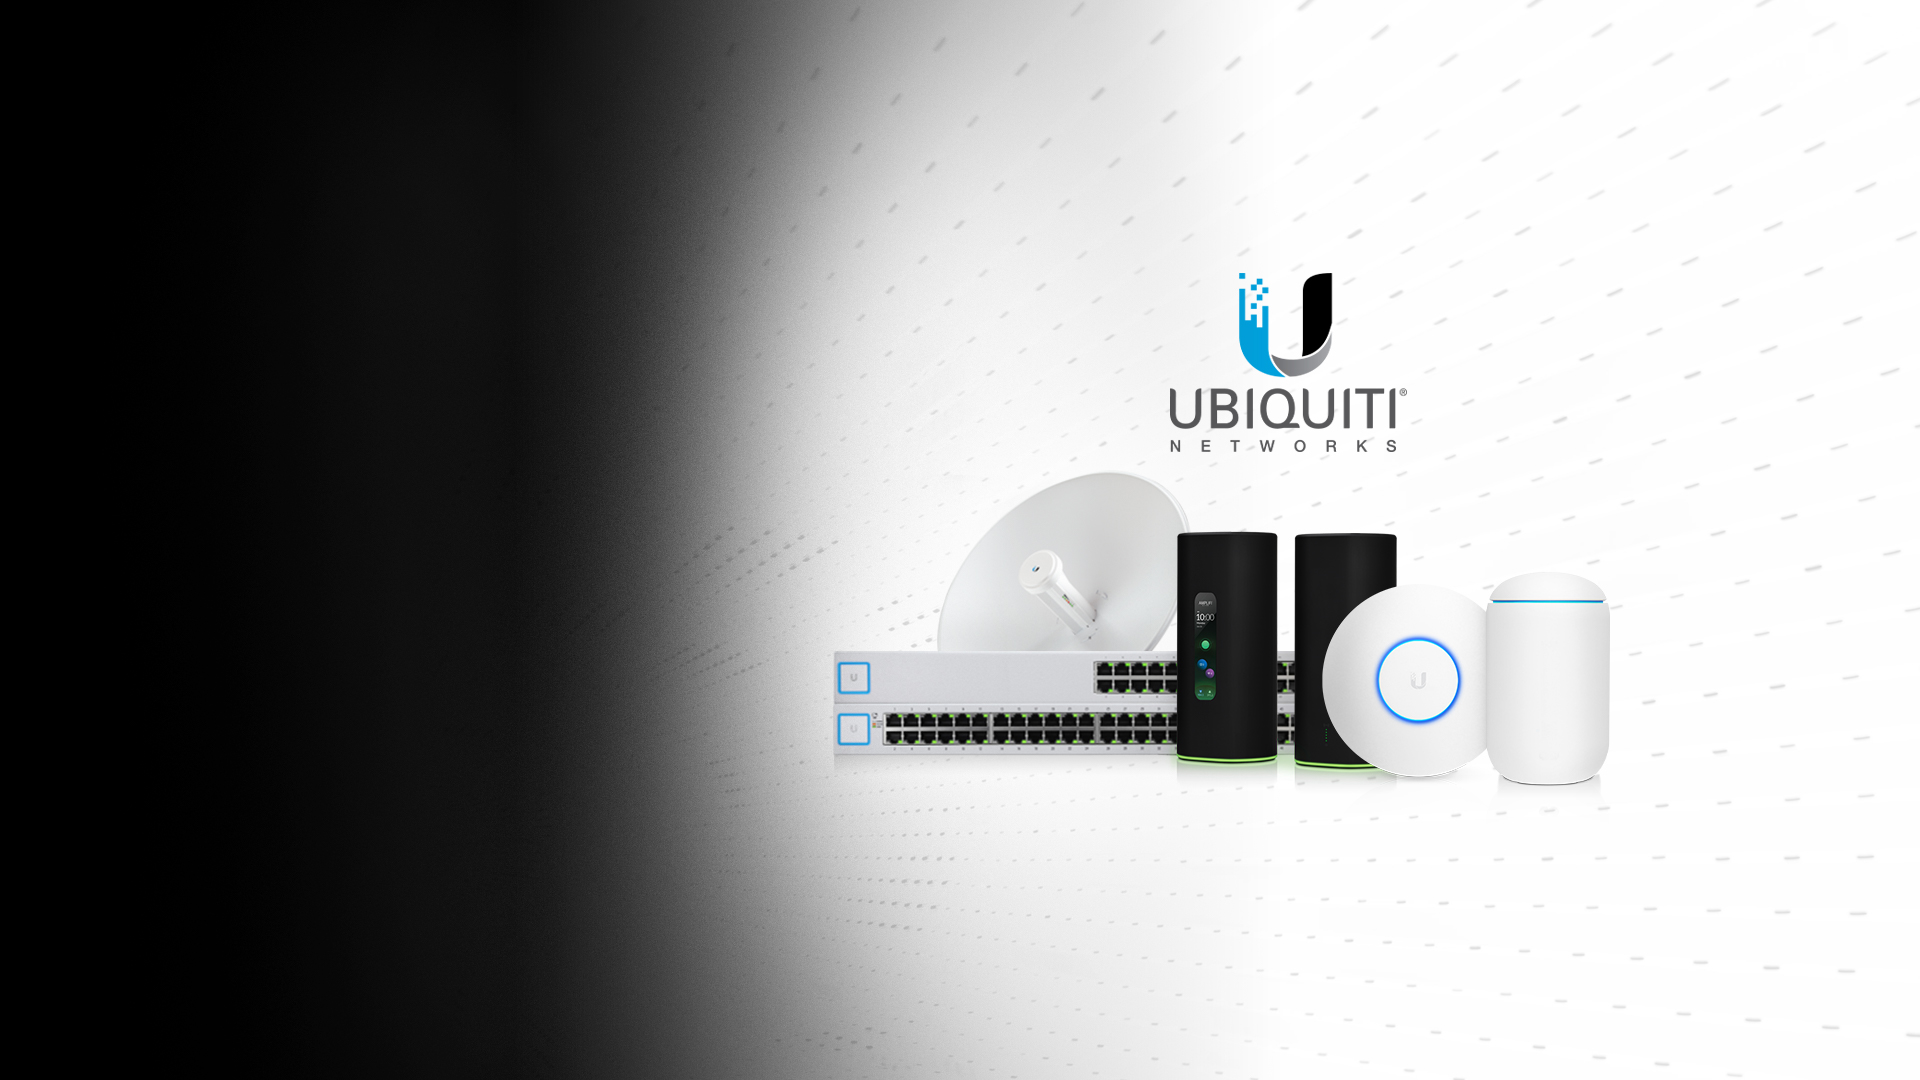 Official Distributor of Ubiquiti